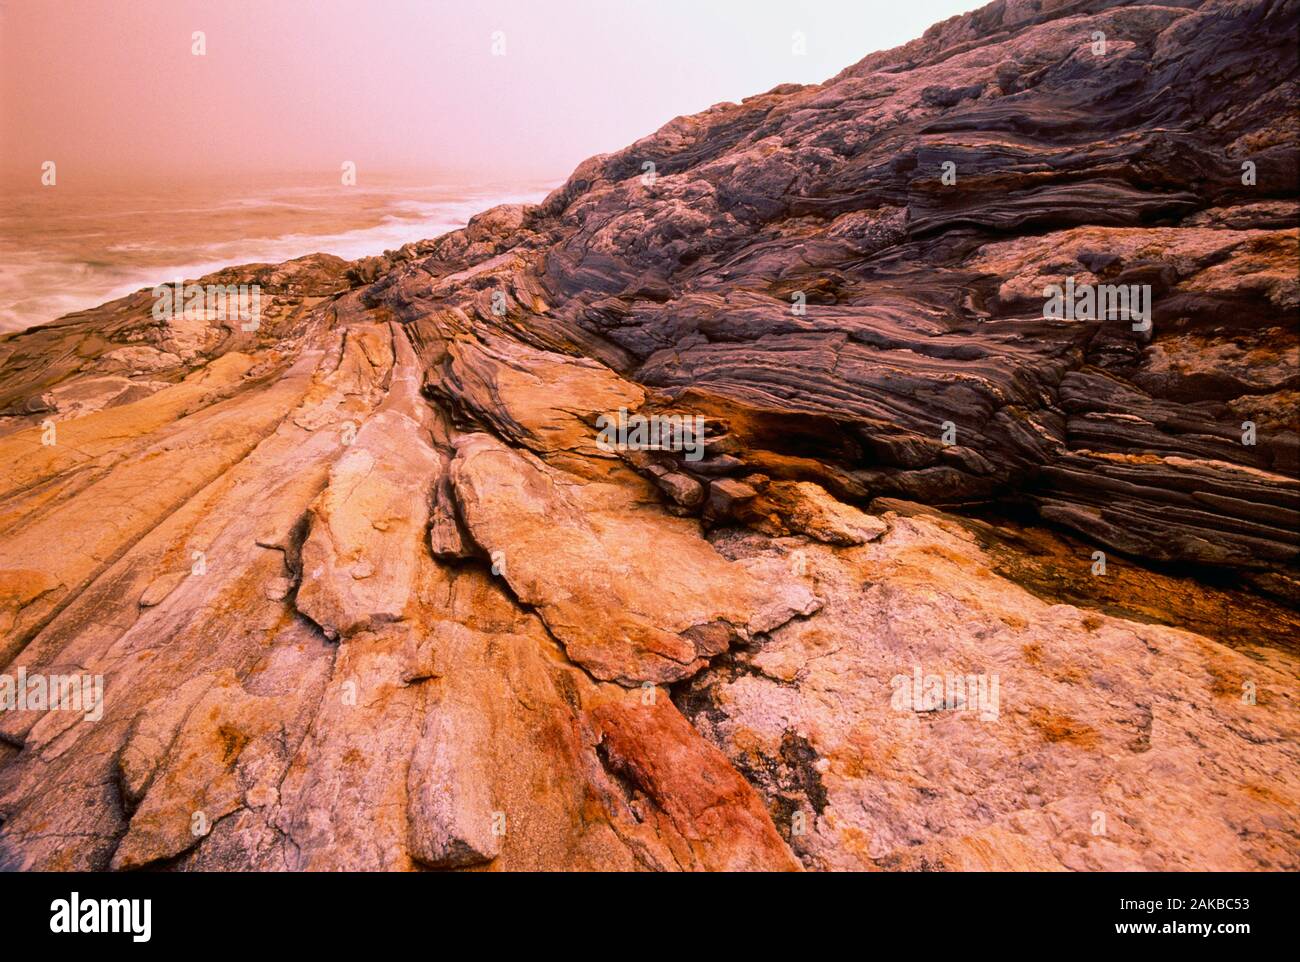 Landscape with view of rocky coastline at sunset, Pemaquid Point, Bristol, Maine, USA Stock Photo